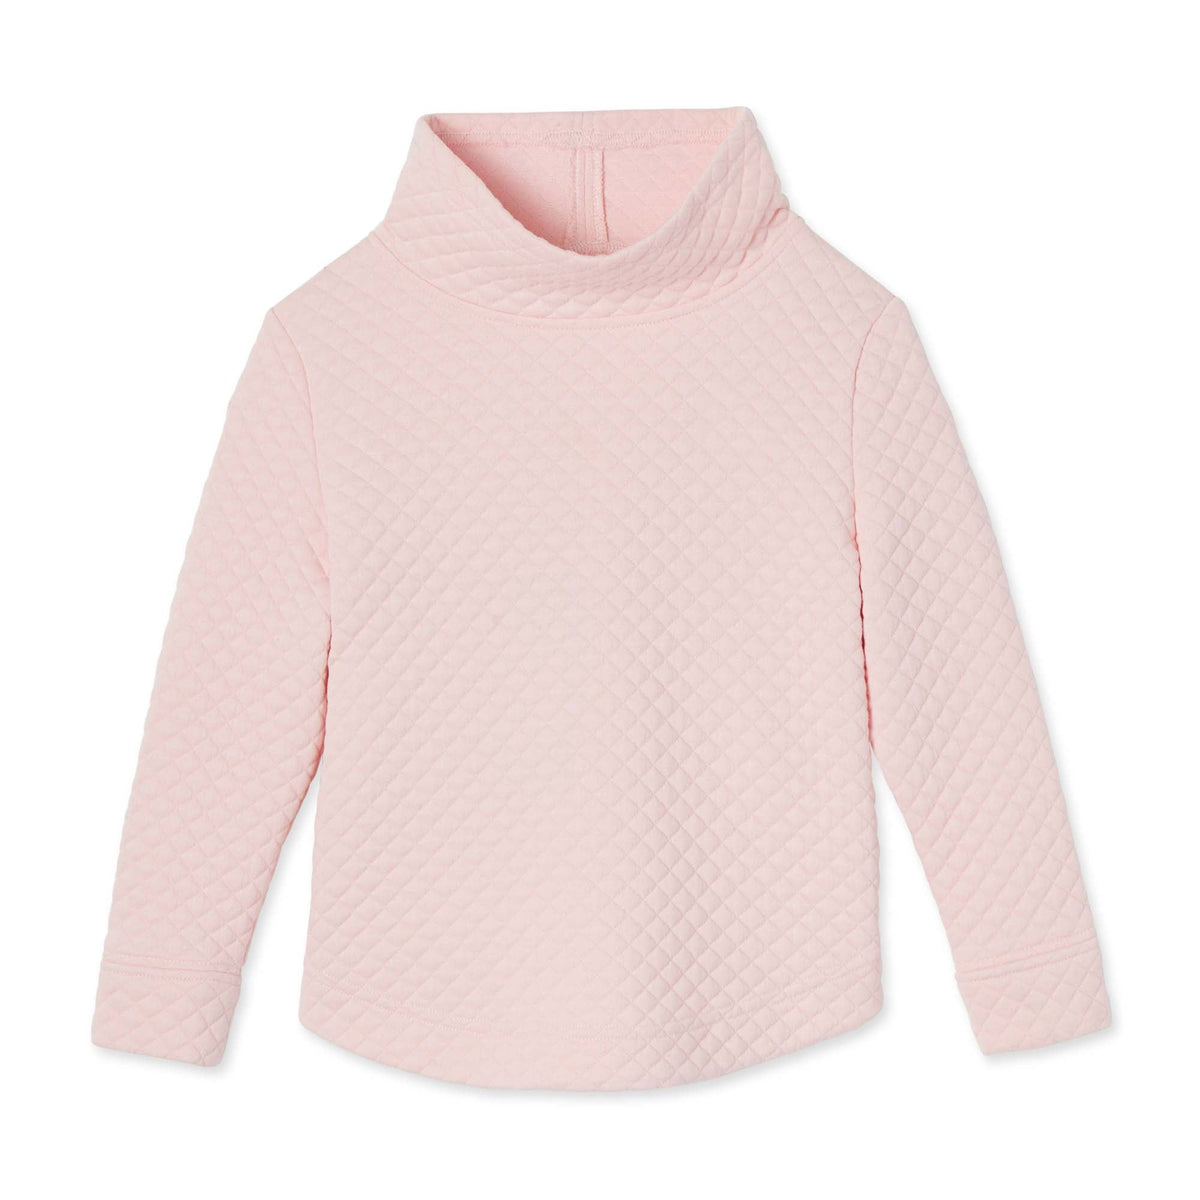 Classic and Preppy Wren Quilted Pullover, Impatiens Pink-Shirts and Tops-Impatiens Pink-XS (2-3T)-CPC - Classic Prep Childrenswear